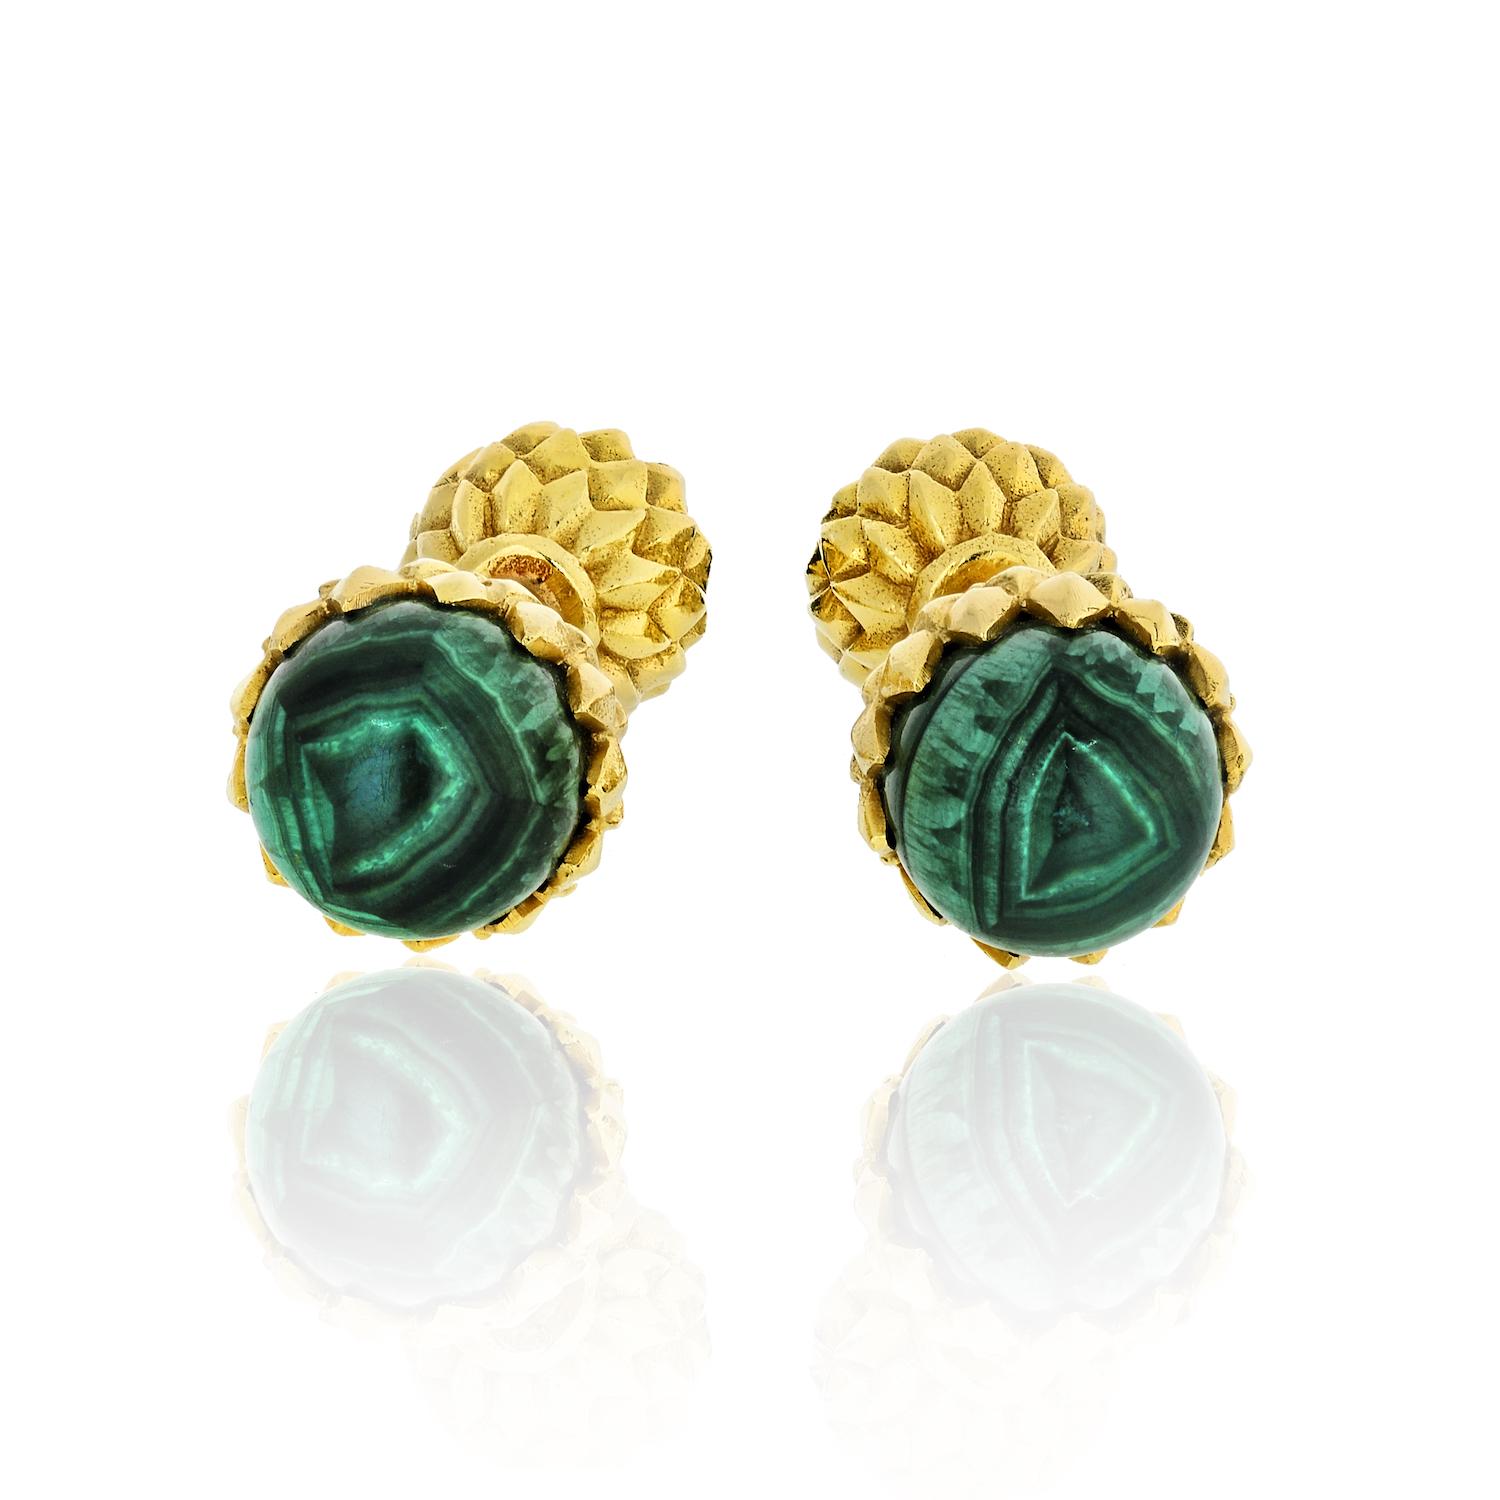 Vintage Tiffany & Co 18k yellow gold and Malachite acorn cufflinks by designer Jean Schlumberger.
A signature Jean Schlumberger design for Tiffany's.

DIMENSIONS
W .50 in. x D 1.25 in.
W 12.7 mm x D 31.75 mm
LENGTH
1.25 in. (31.75 mm)
WEIGHT
14.6 g